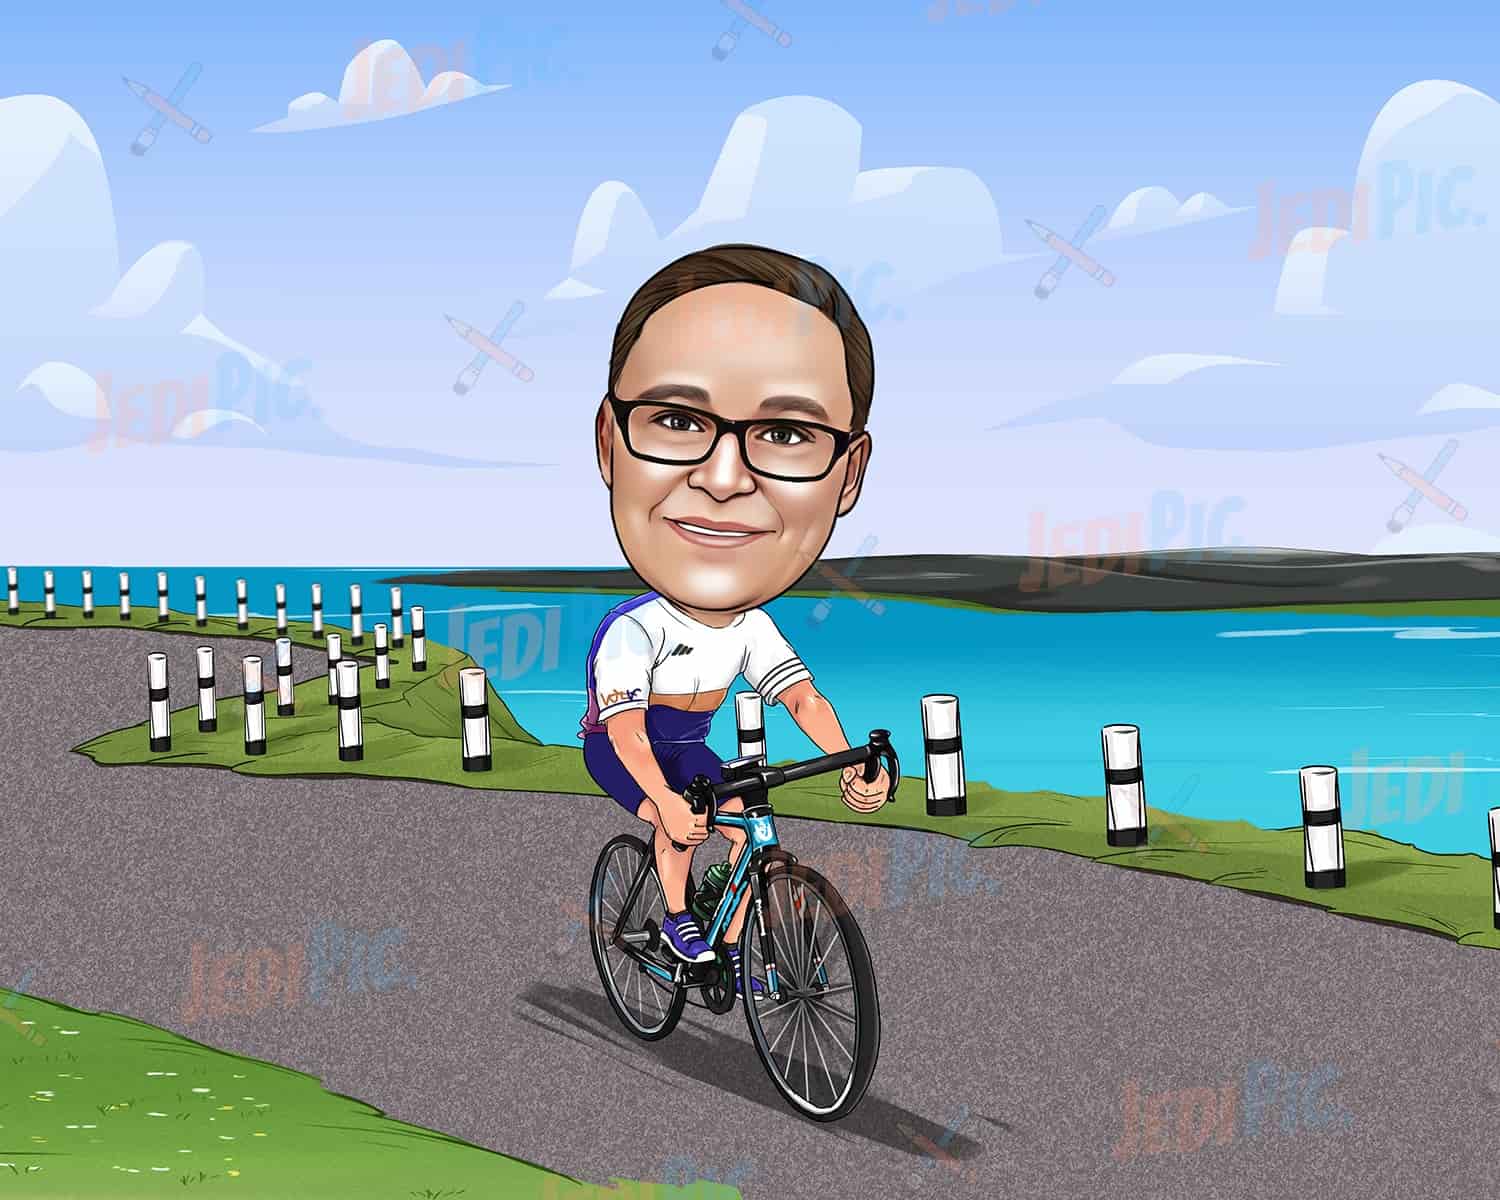 Caricature of Person Riding a Bicycle